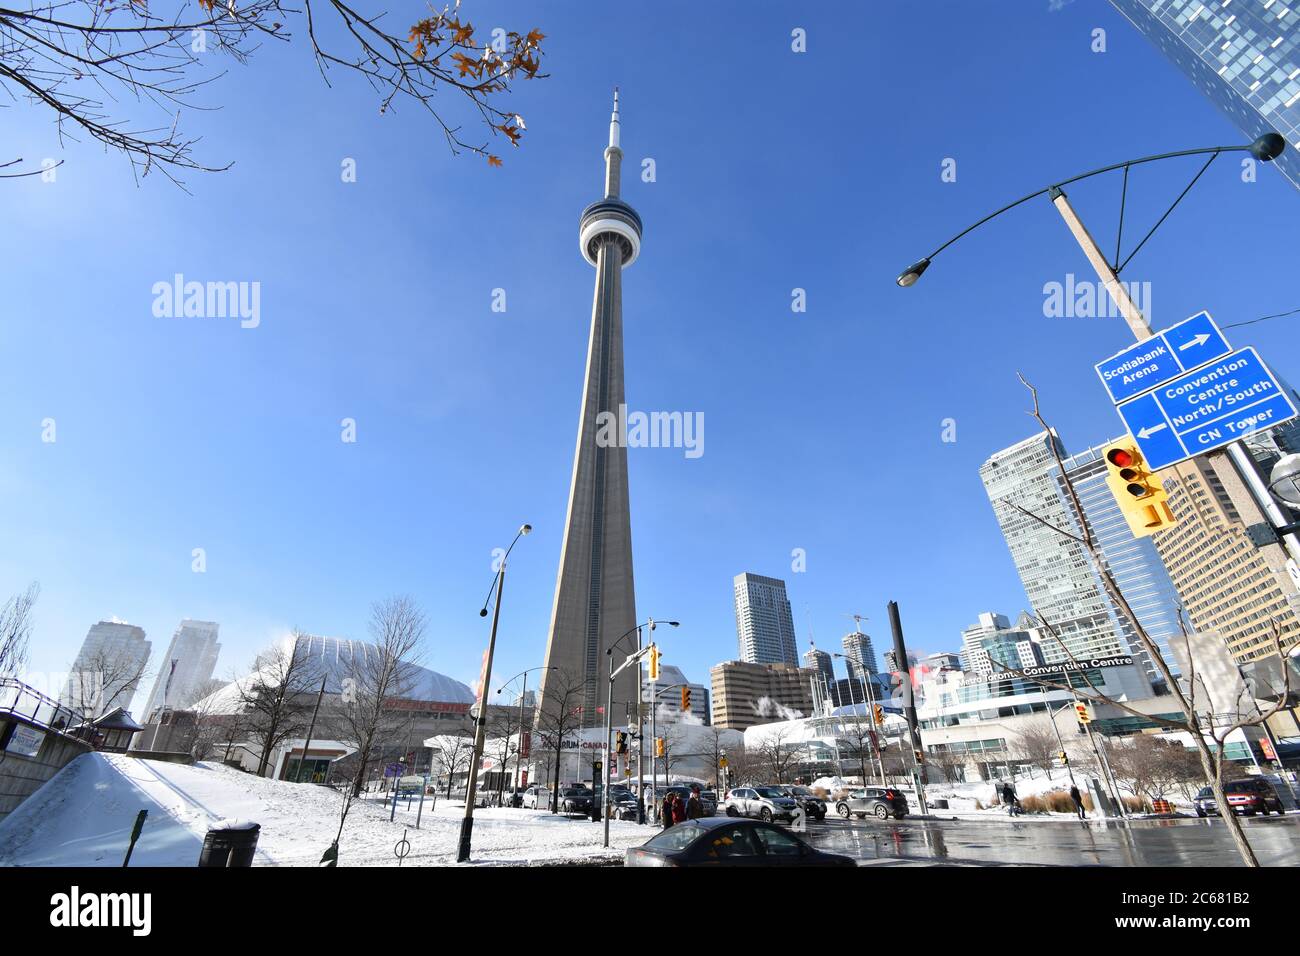 The CN tower from Lower Simcoe Street on a clear winters morning.  The Metro convention Centre, Ripley's Aquarium and street signs are visible. Stock Photo